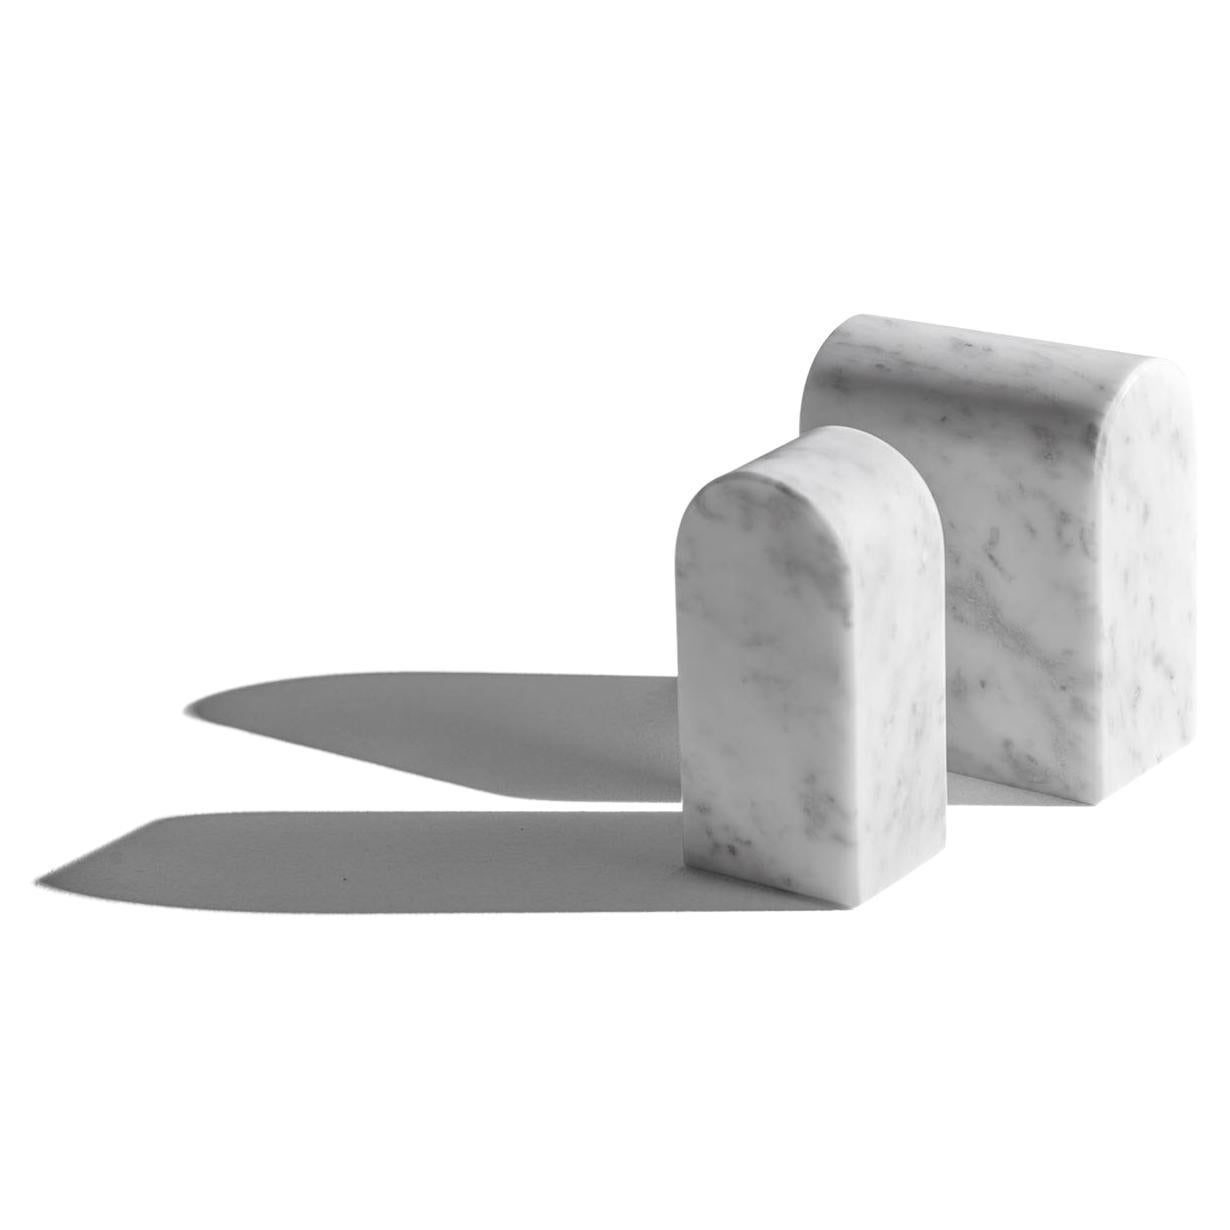 “Triumph Bookends" White Carrara Marble Minimalist Bookend by Aparentment For Sale